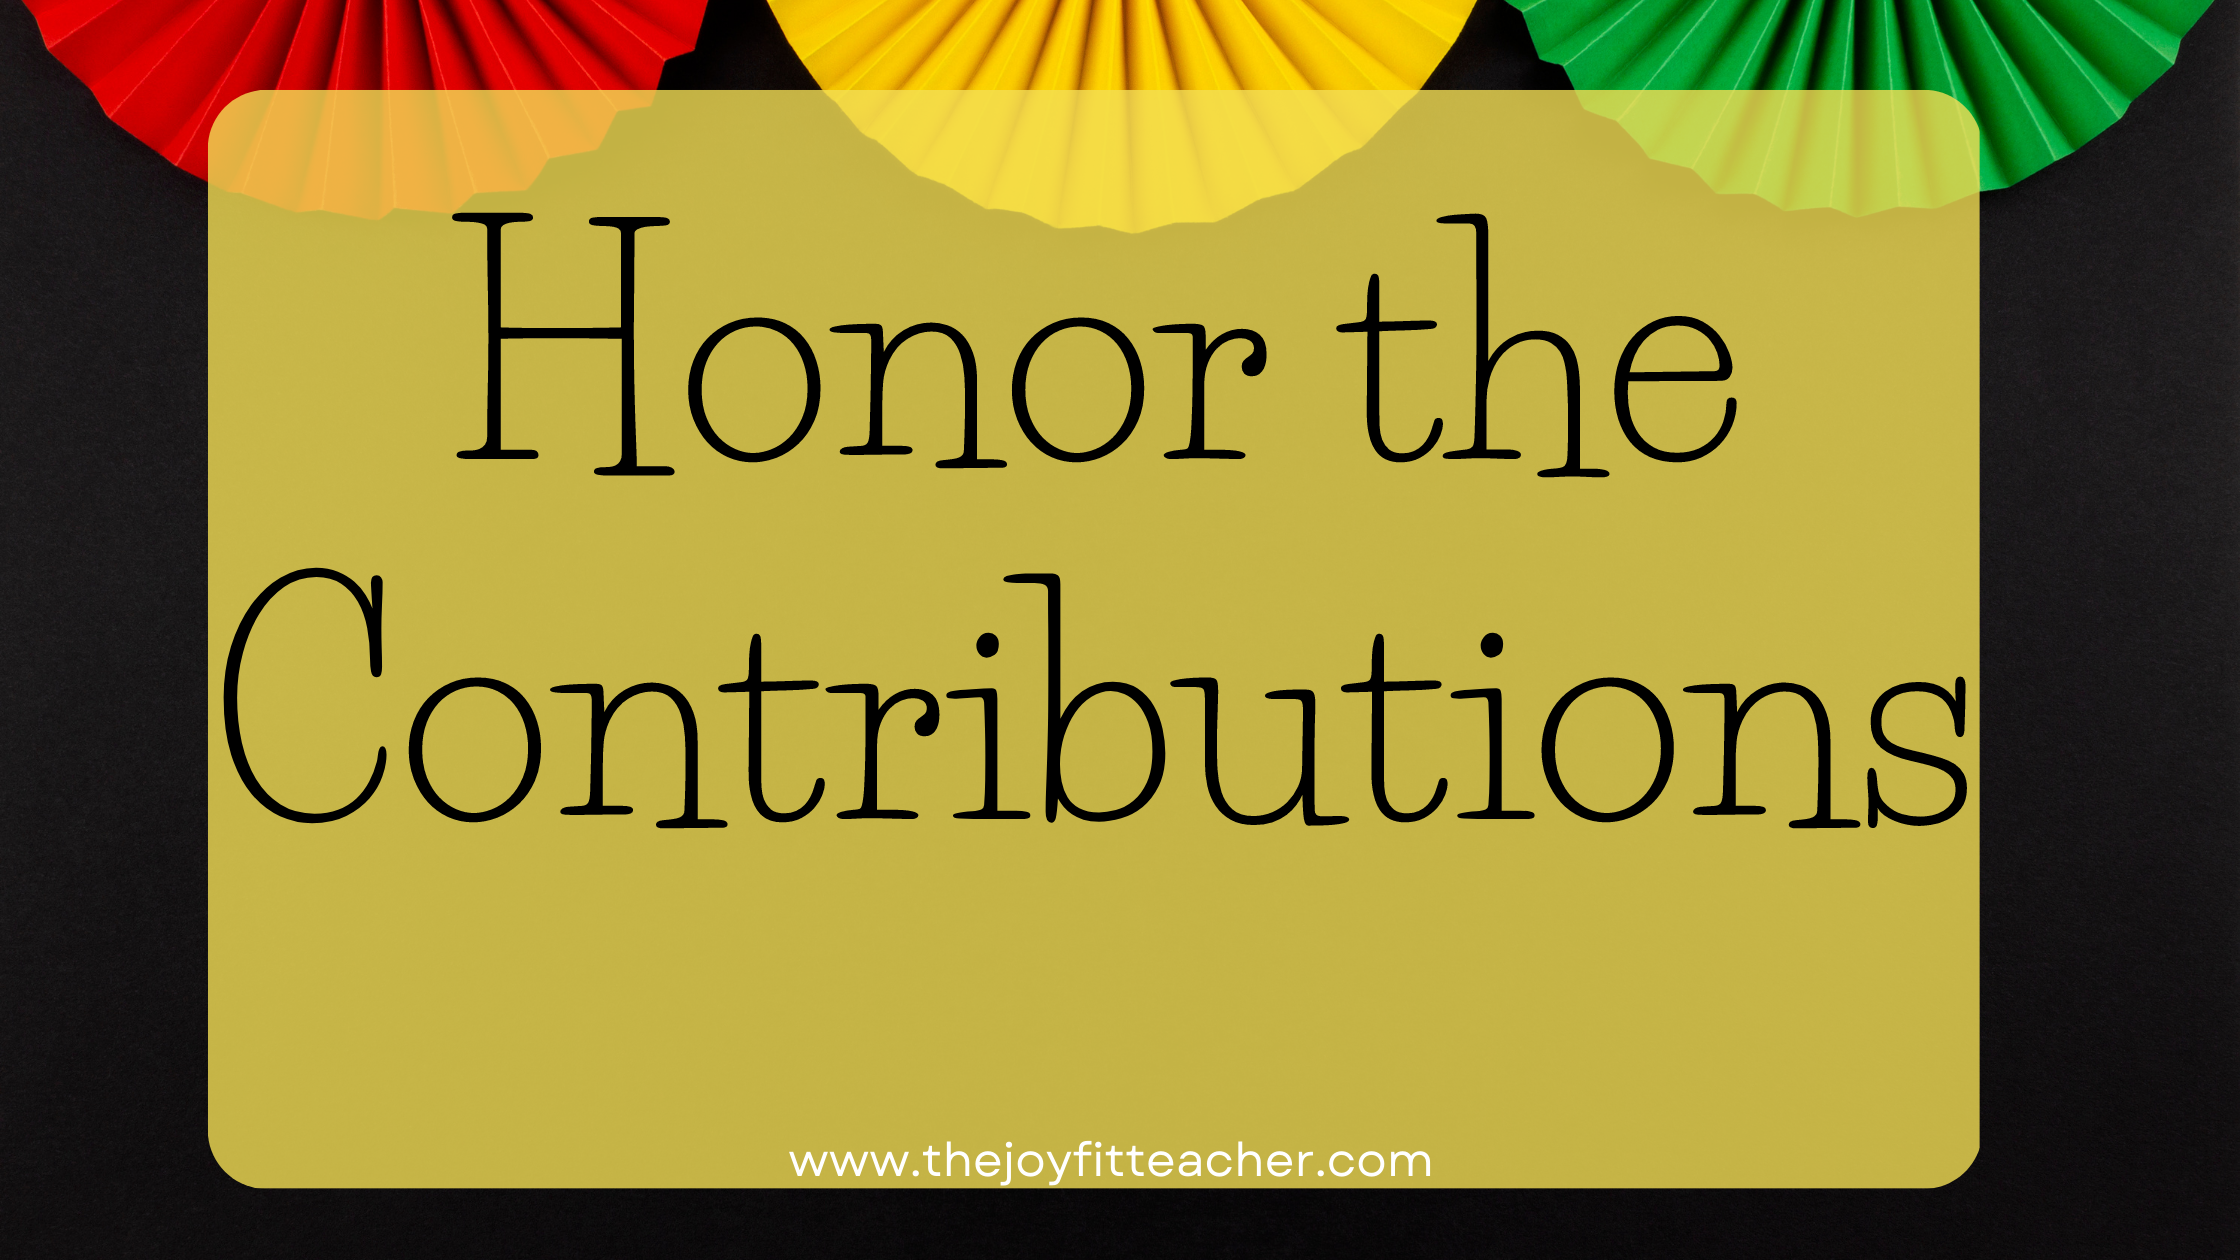 Honor the contributions